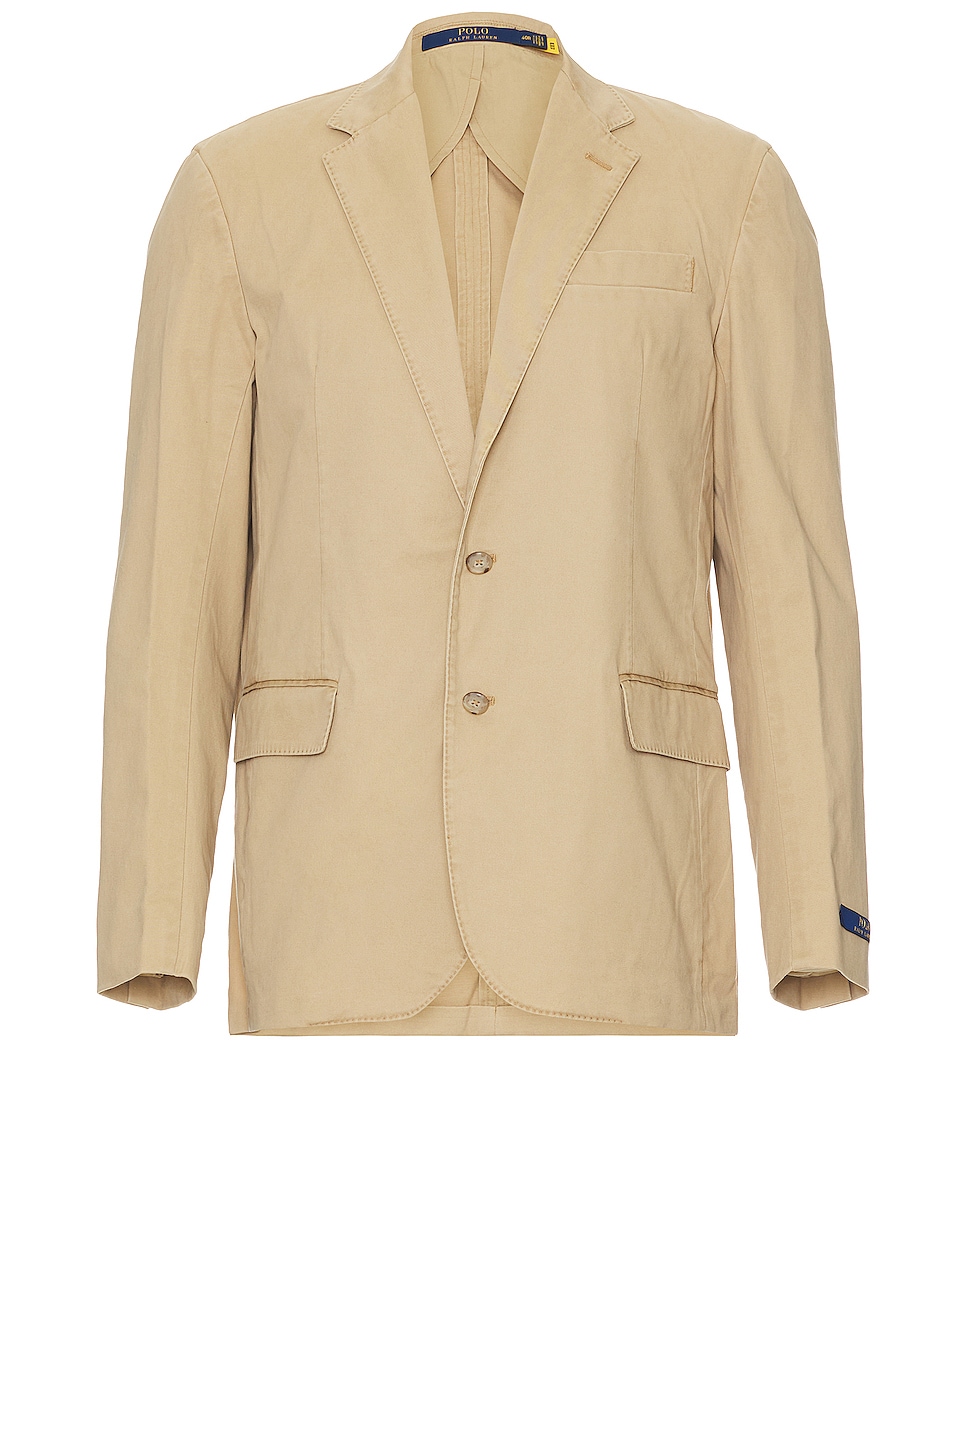 Image 1 of Polo Ralph Lauren Stretch Blazer in Monument Tan